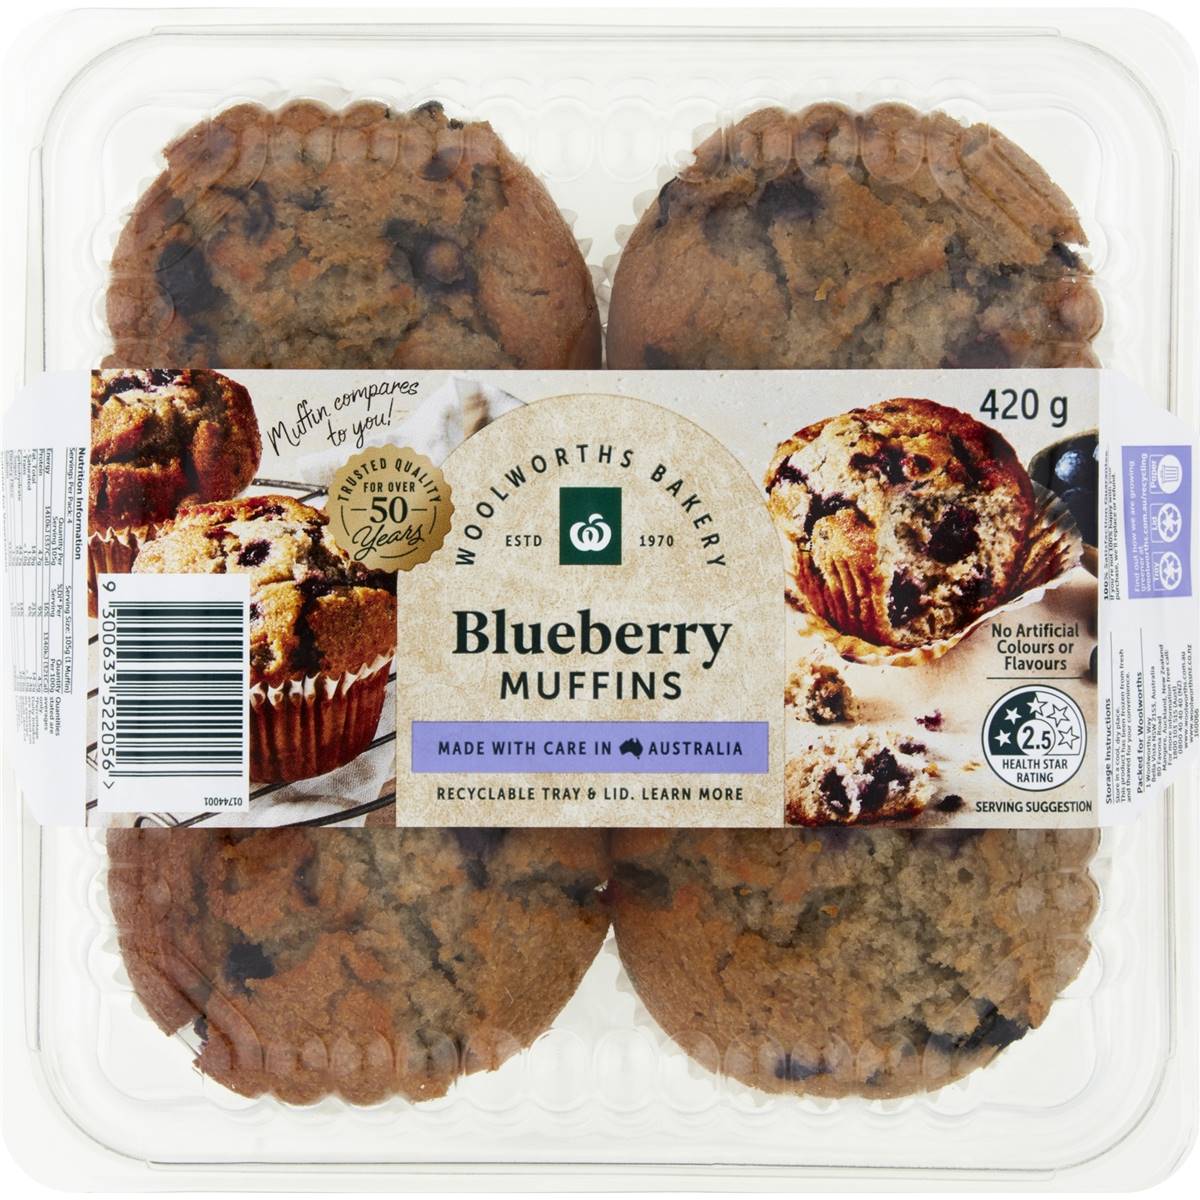 Calories in Woolworths Blueberry Muffins